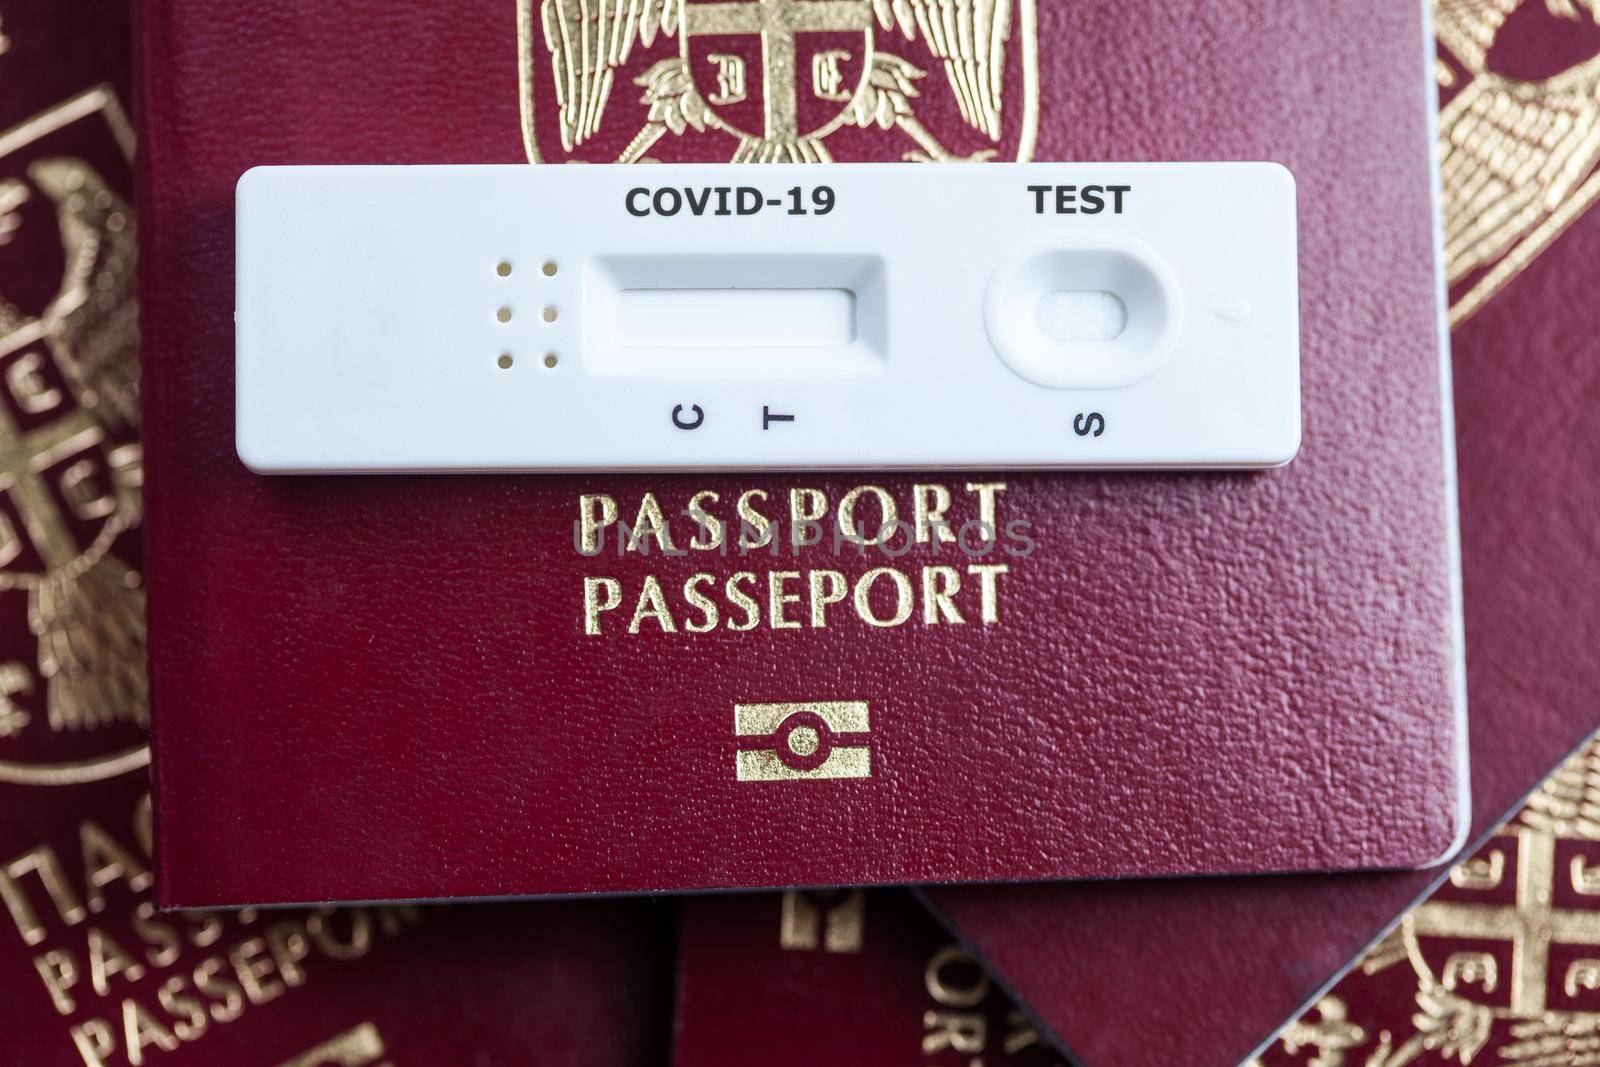 Rapid serology COVID-19 test cassette on red biometric passport,travel in the time of Coronavirus concept,antibody testing upon arrival or departure to if person was infected,proof of convalescence